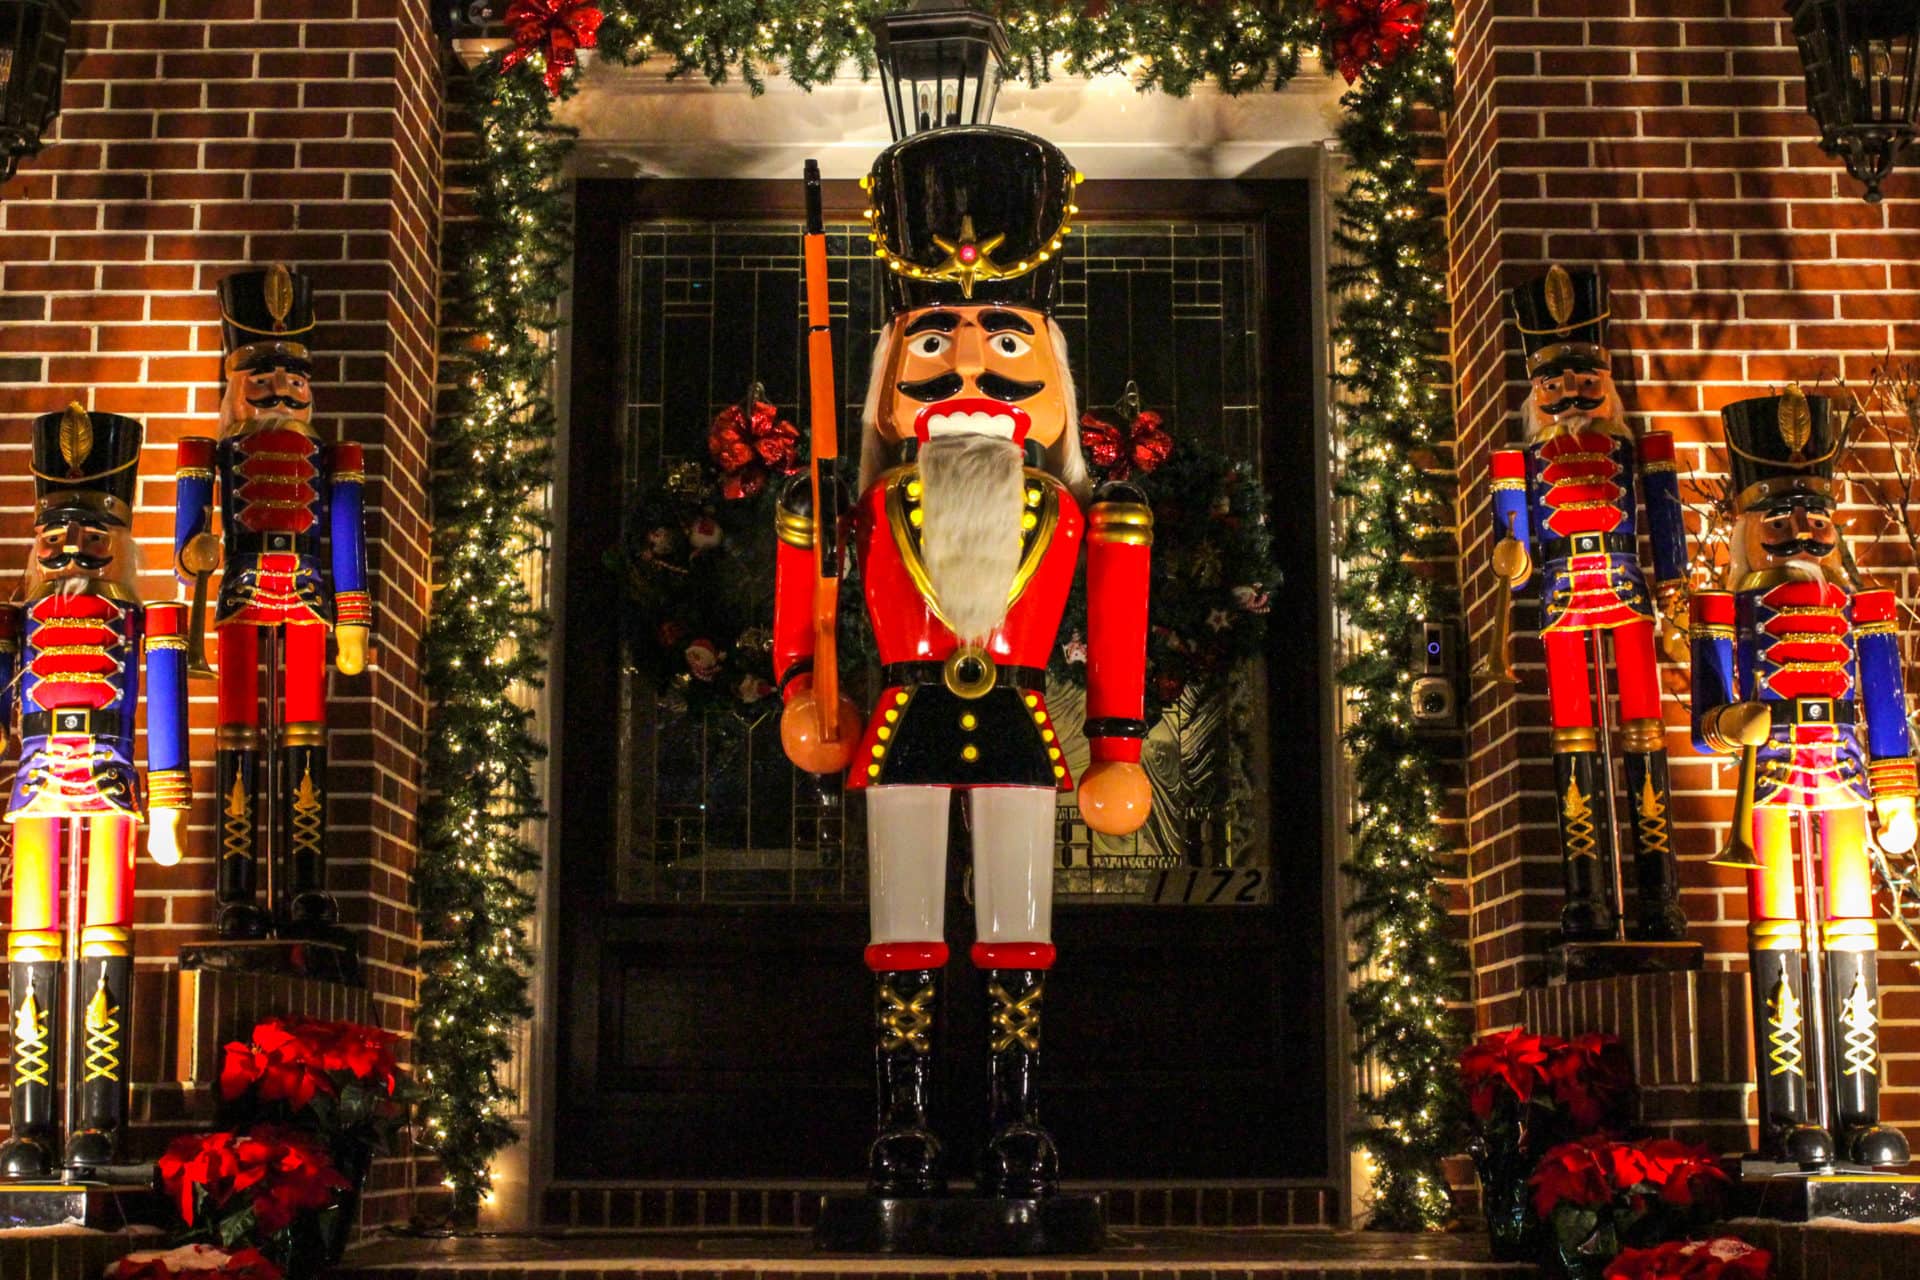 A large nutcracker stands guard in front of a door, surrounded by smaller nutcrackers 